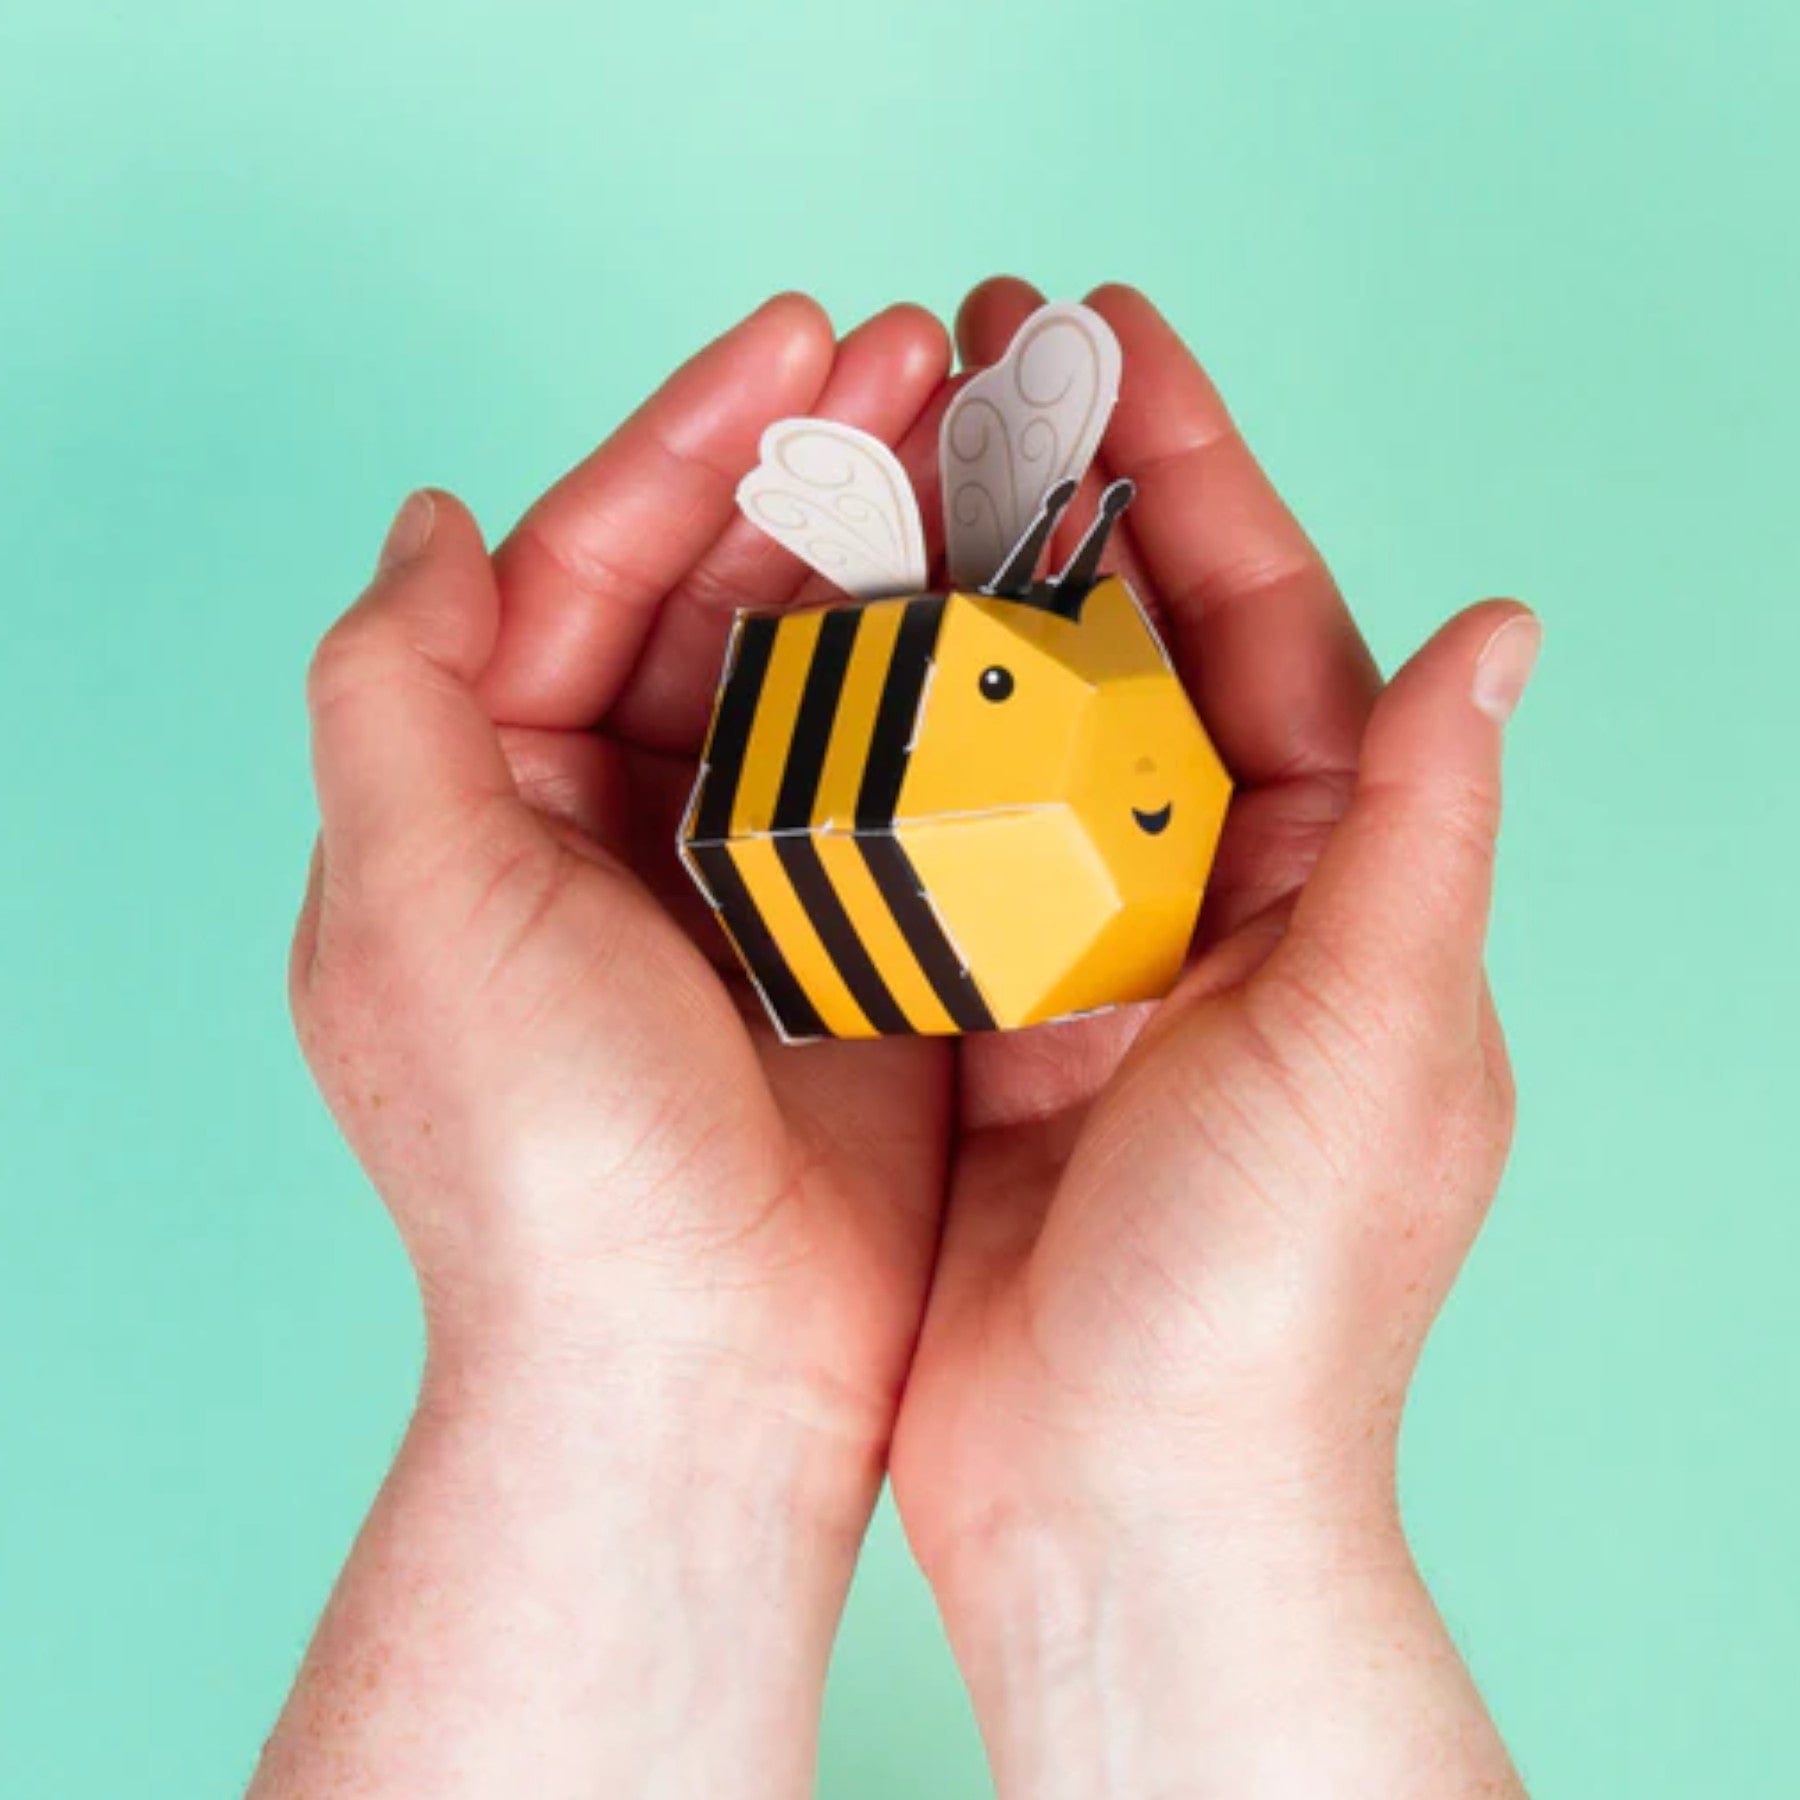 Hands holding a cute bee-shaped paper craft against a mint green background